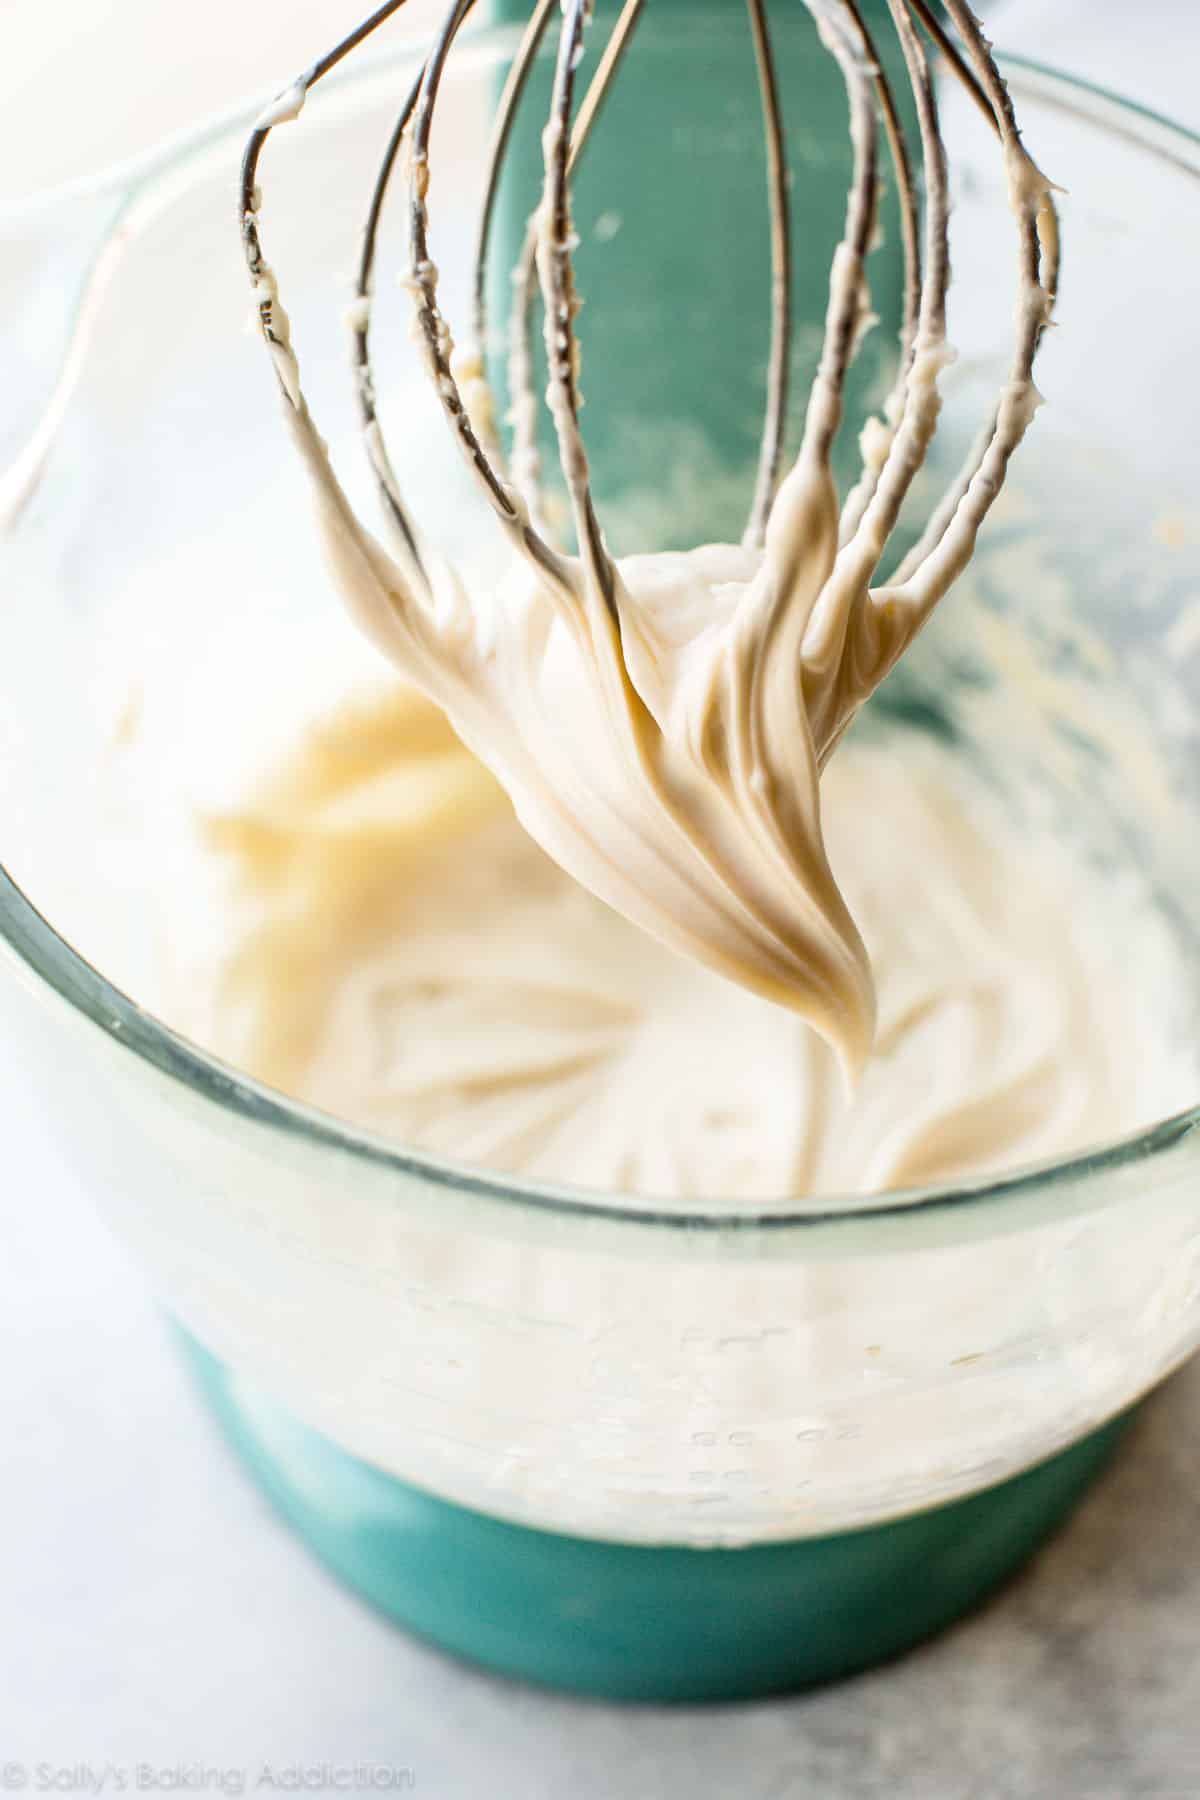 Cream cheese frosting with stand mixer